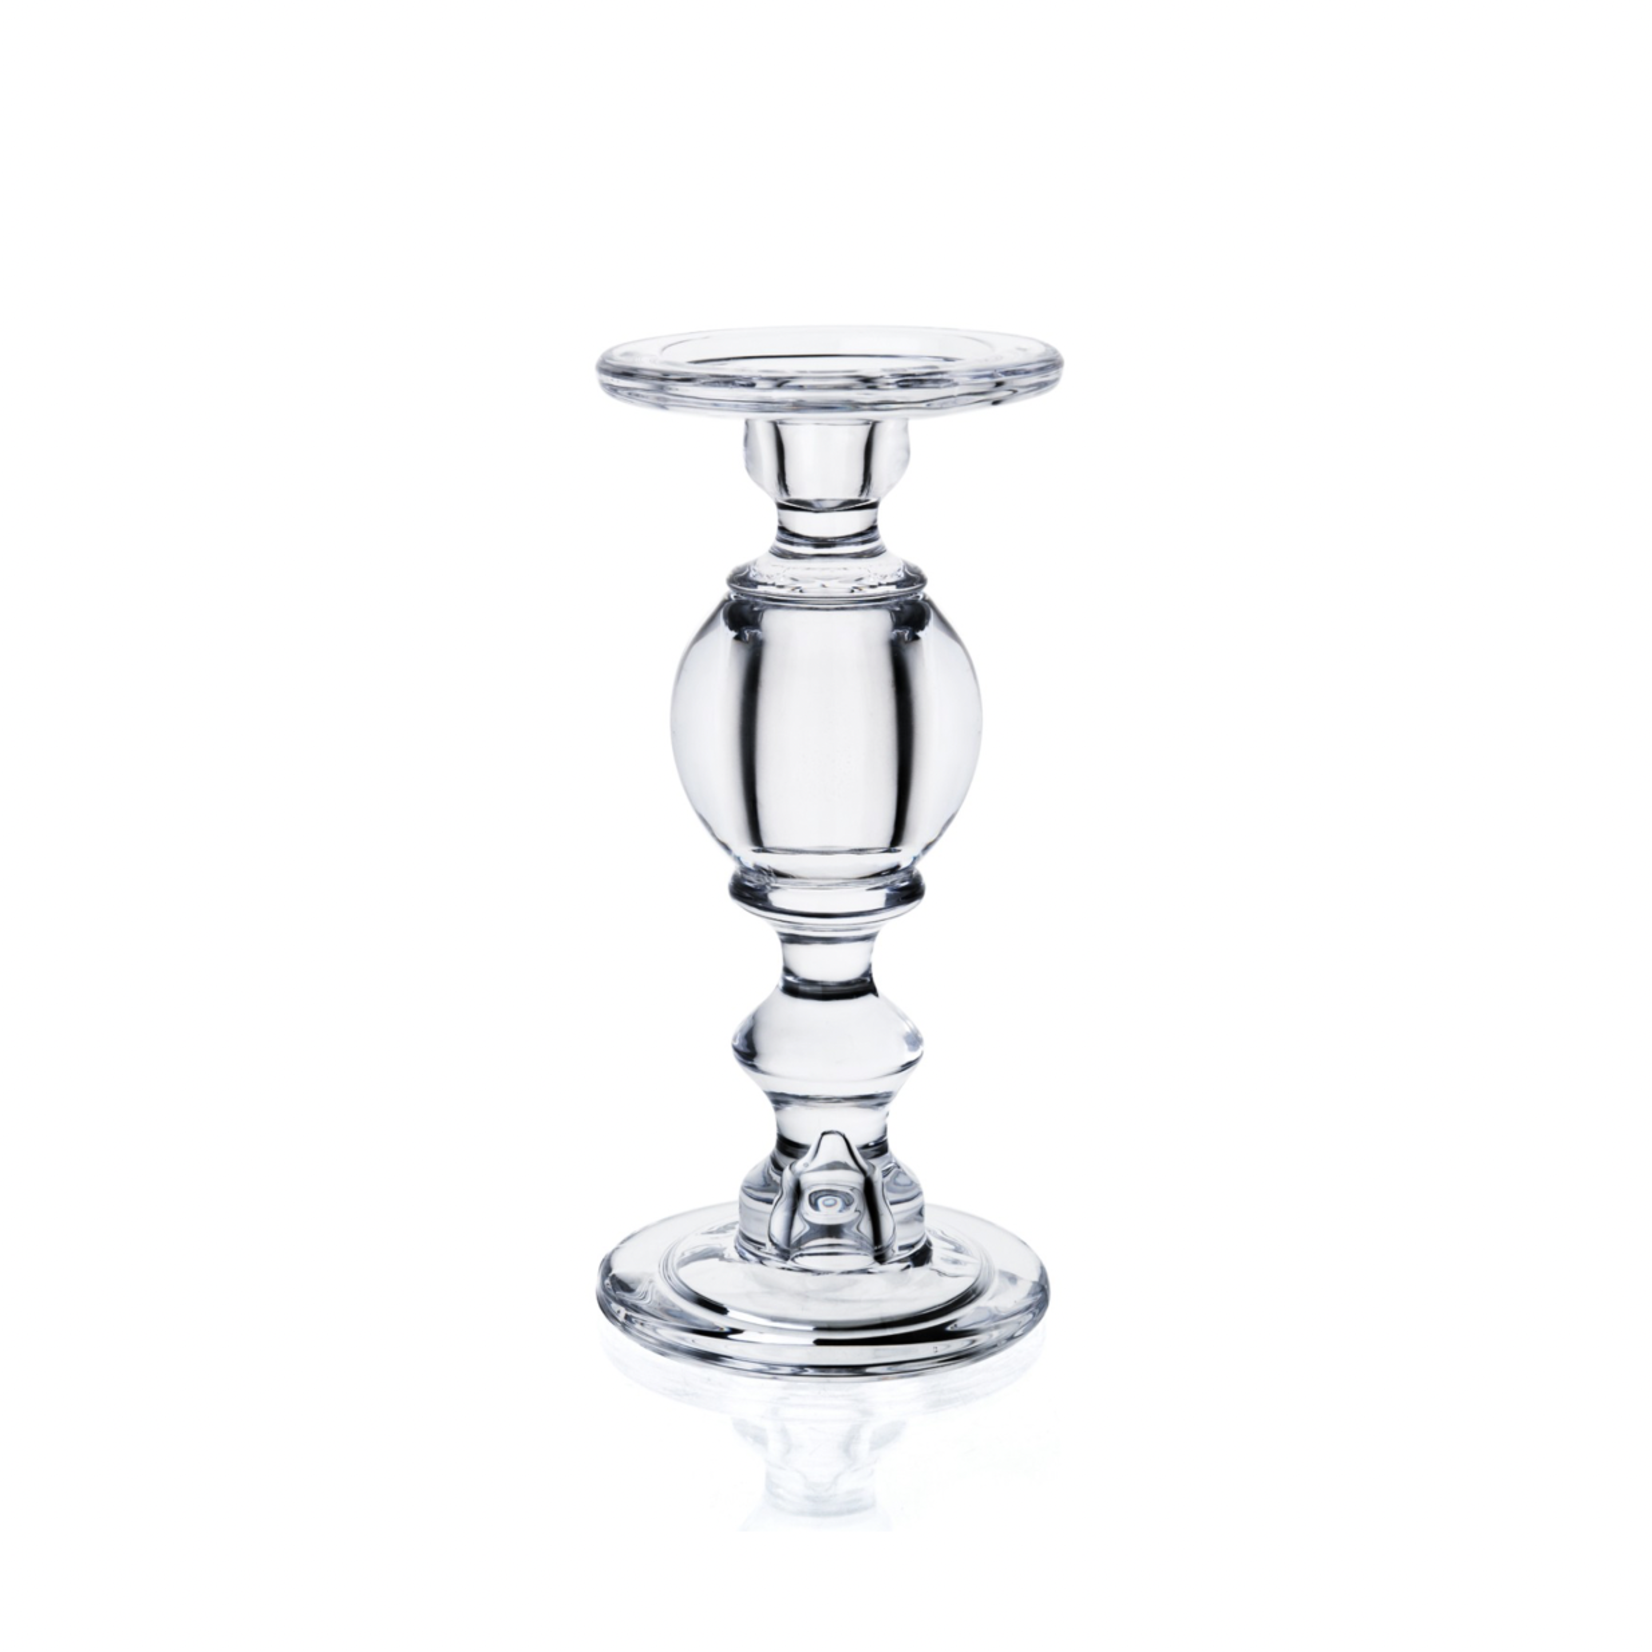 9.5”h x 4.5” GLASS PILLER AND TAPER CANDLE HOLDER